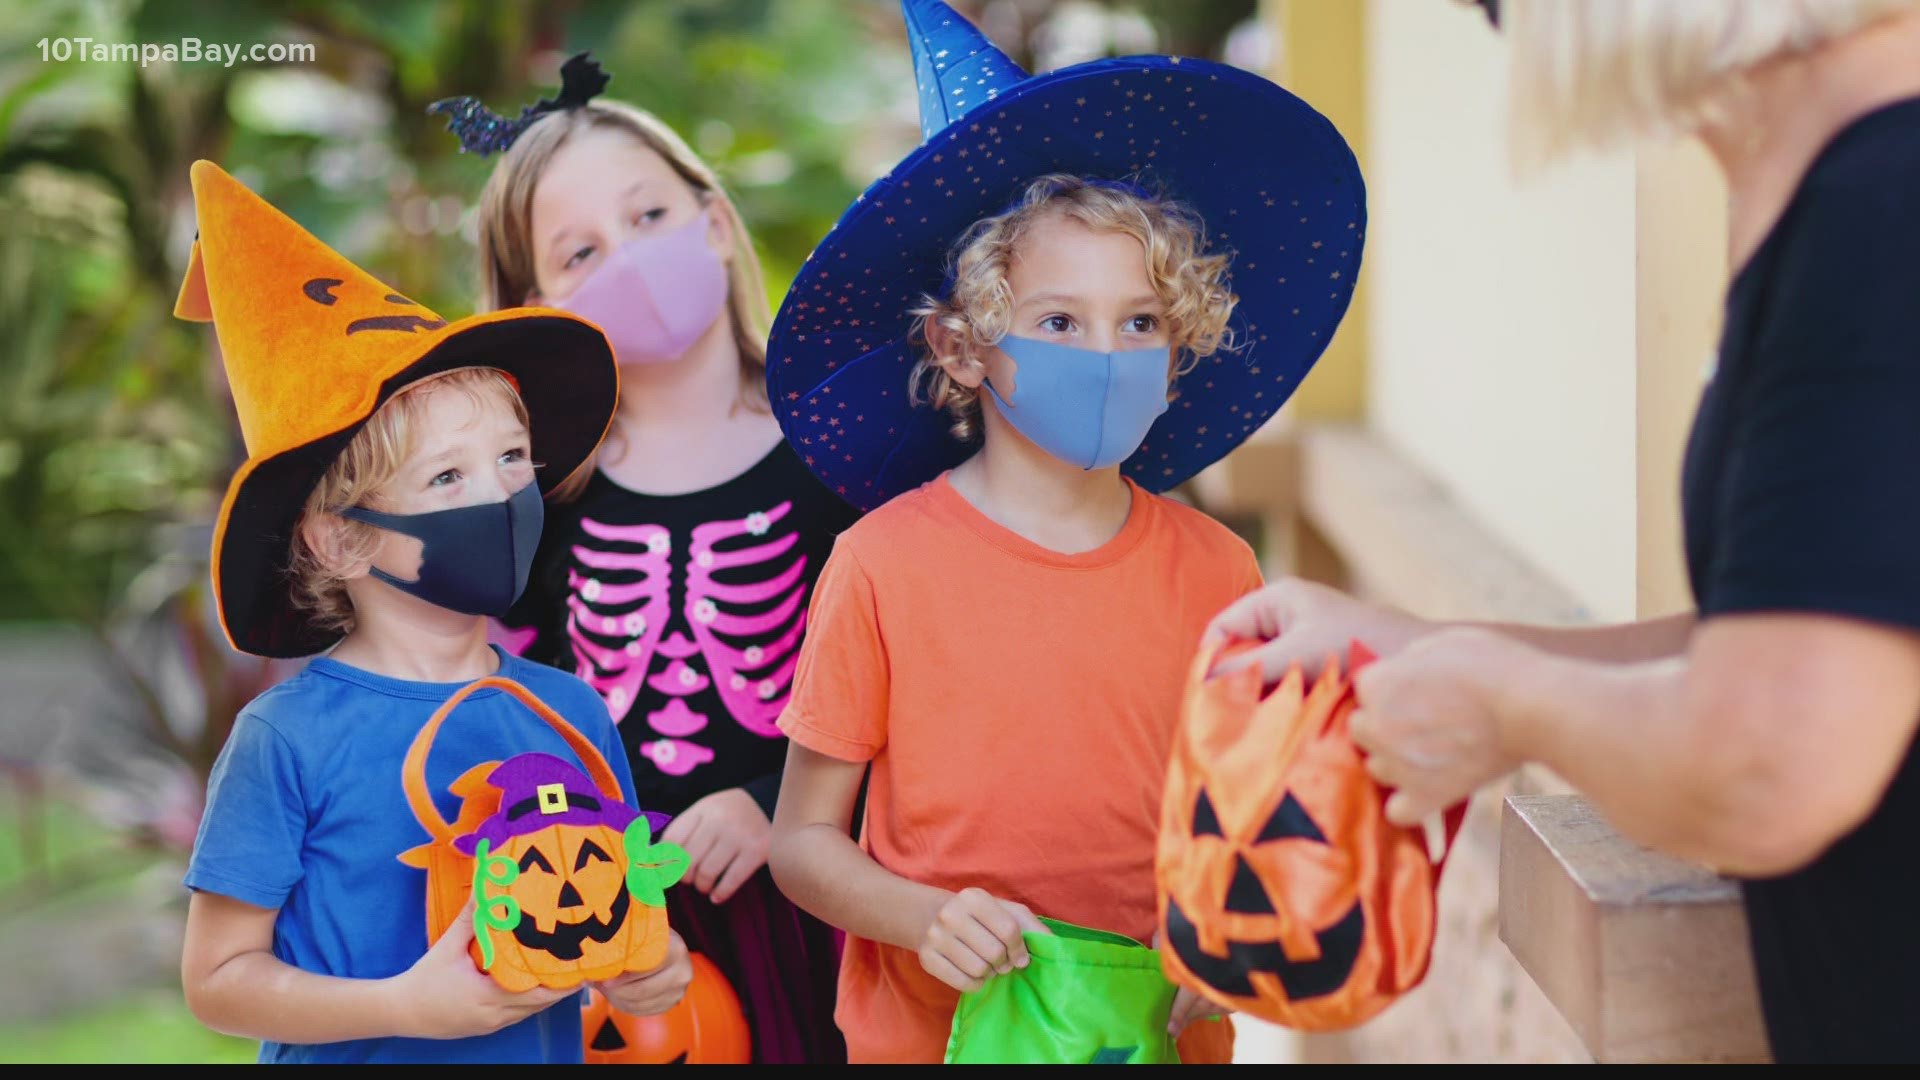 Trick-or-treating is considered a high-risk activity by the CDC but that doesn't mean you need to cancel Halloween.